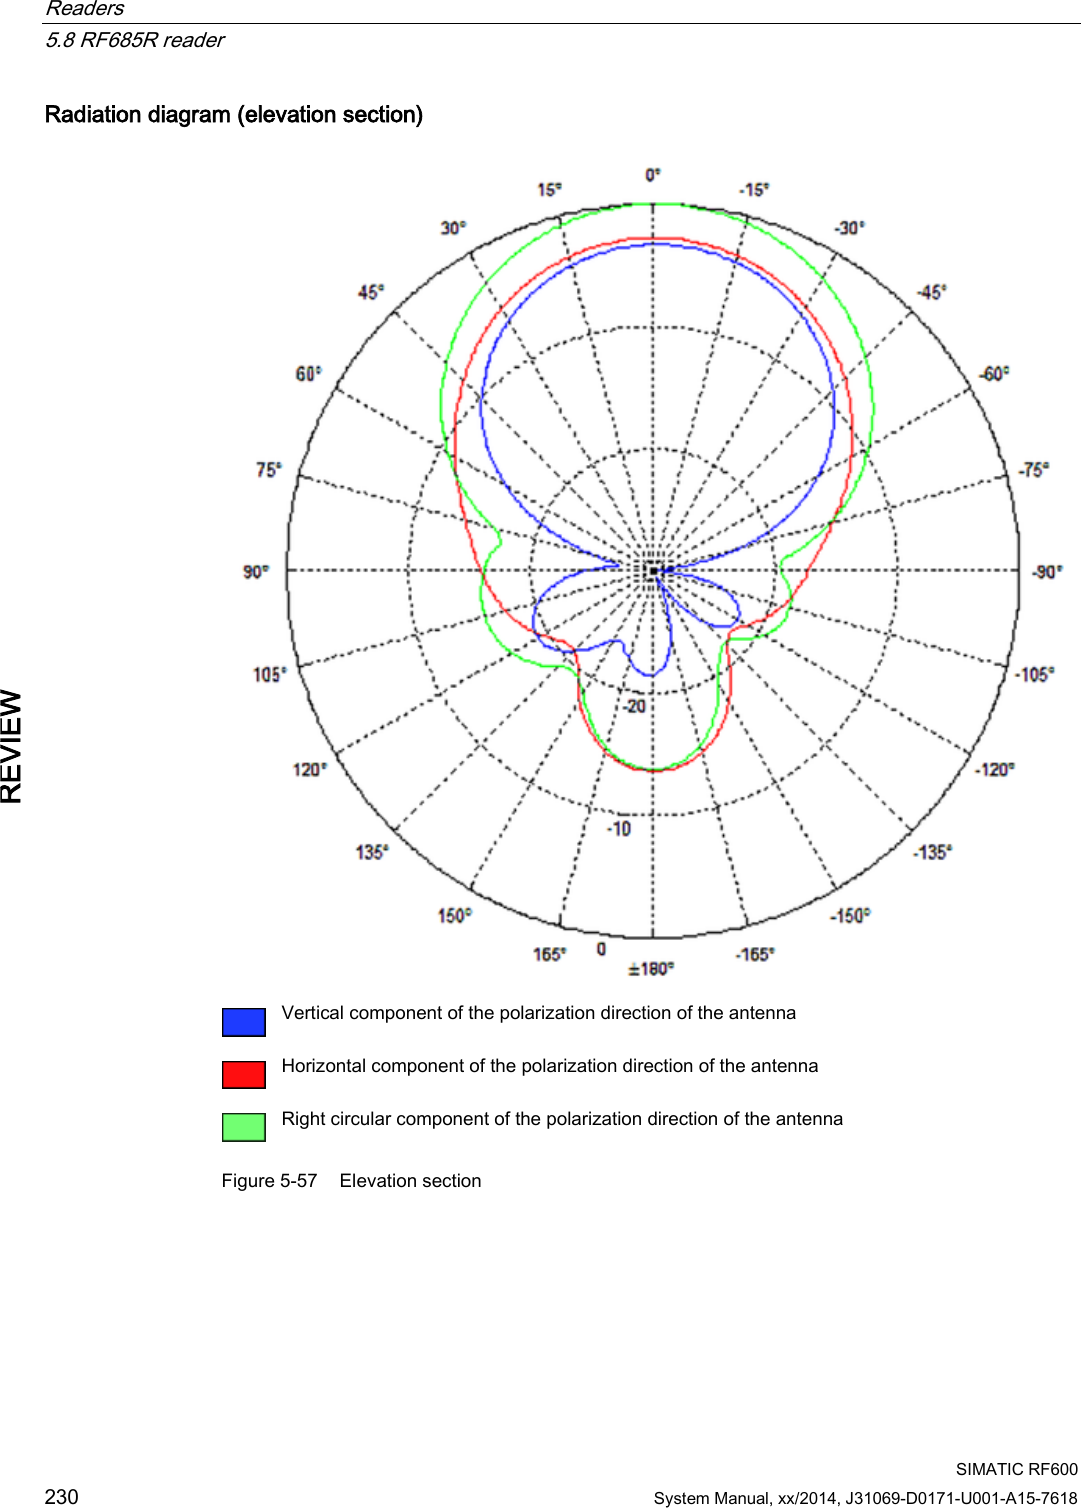 Readers   5.8 RF685R reader  SIMATIC RF600 230 System Manual, xx/2014, J31069-D0171-U001-A15-7618 REVIEW Radiation diagram (elevation section)   Vertical component of the polarization direction of the antenna  Horizontal component of the polarization direction of the antenna  Right circular component of the polarization direction of the antenna Figure 5-57 Elevation section 